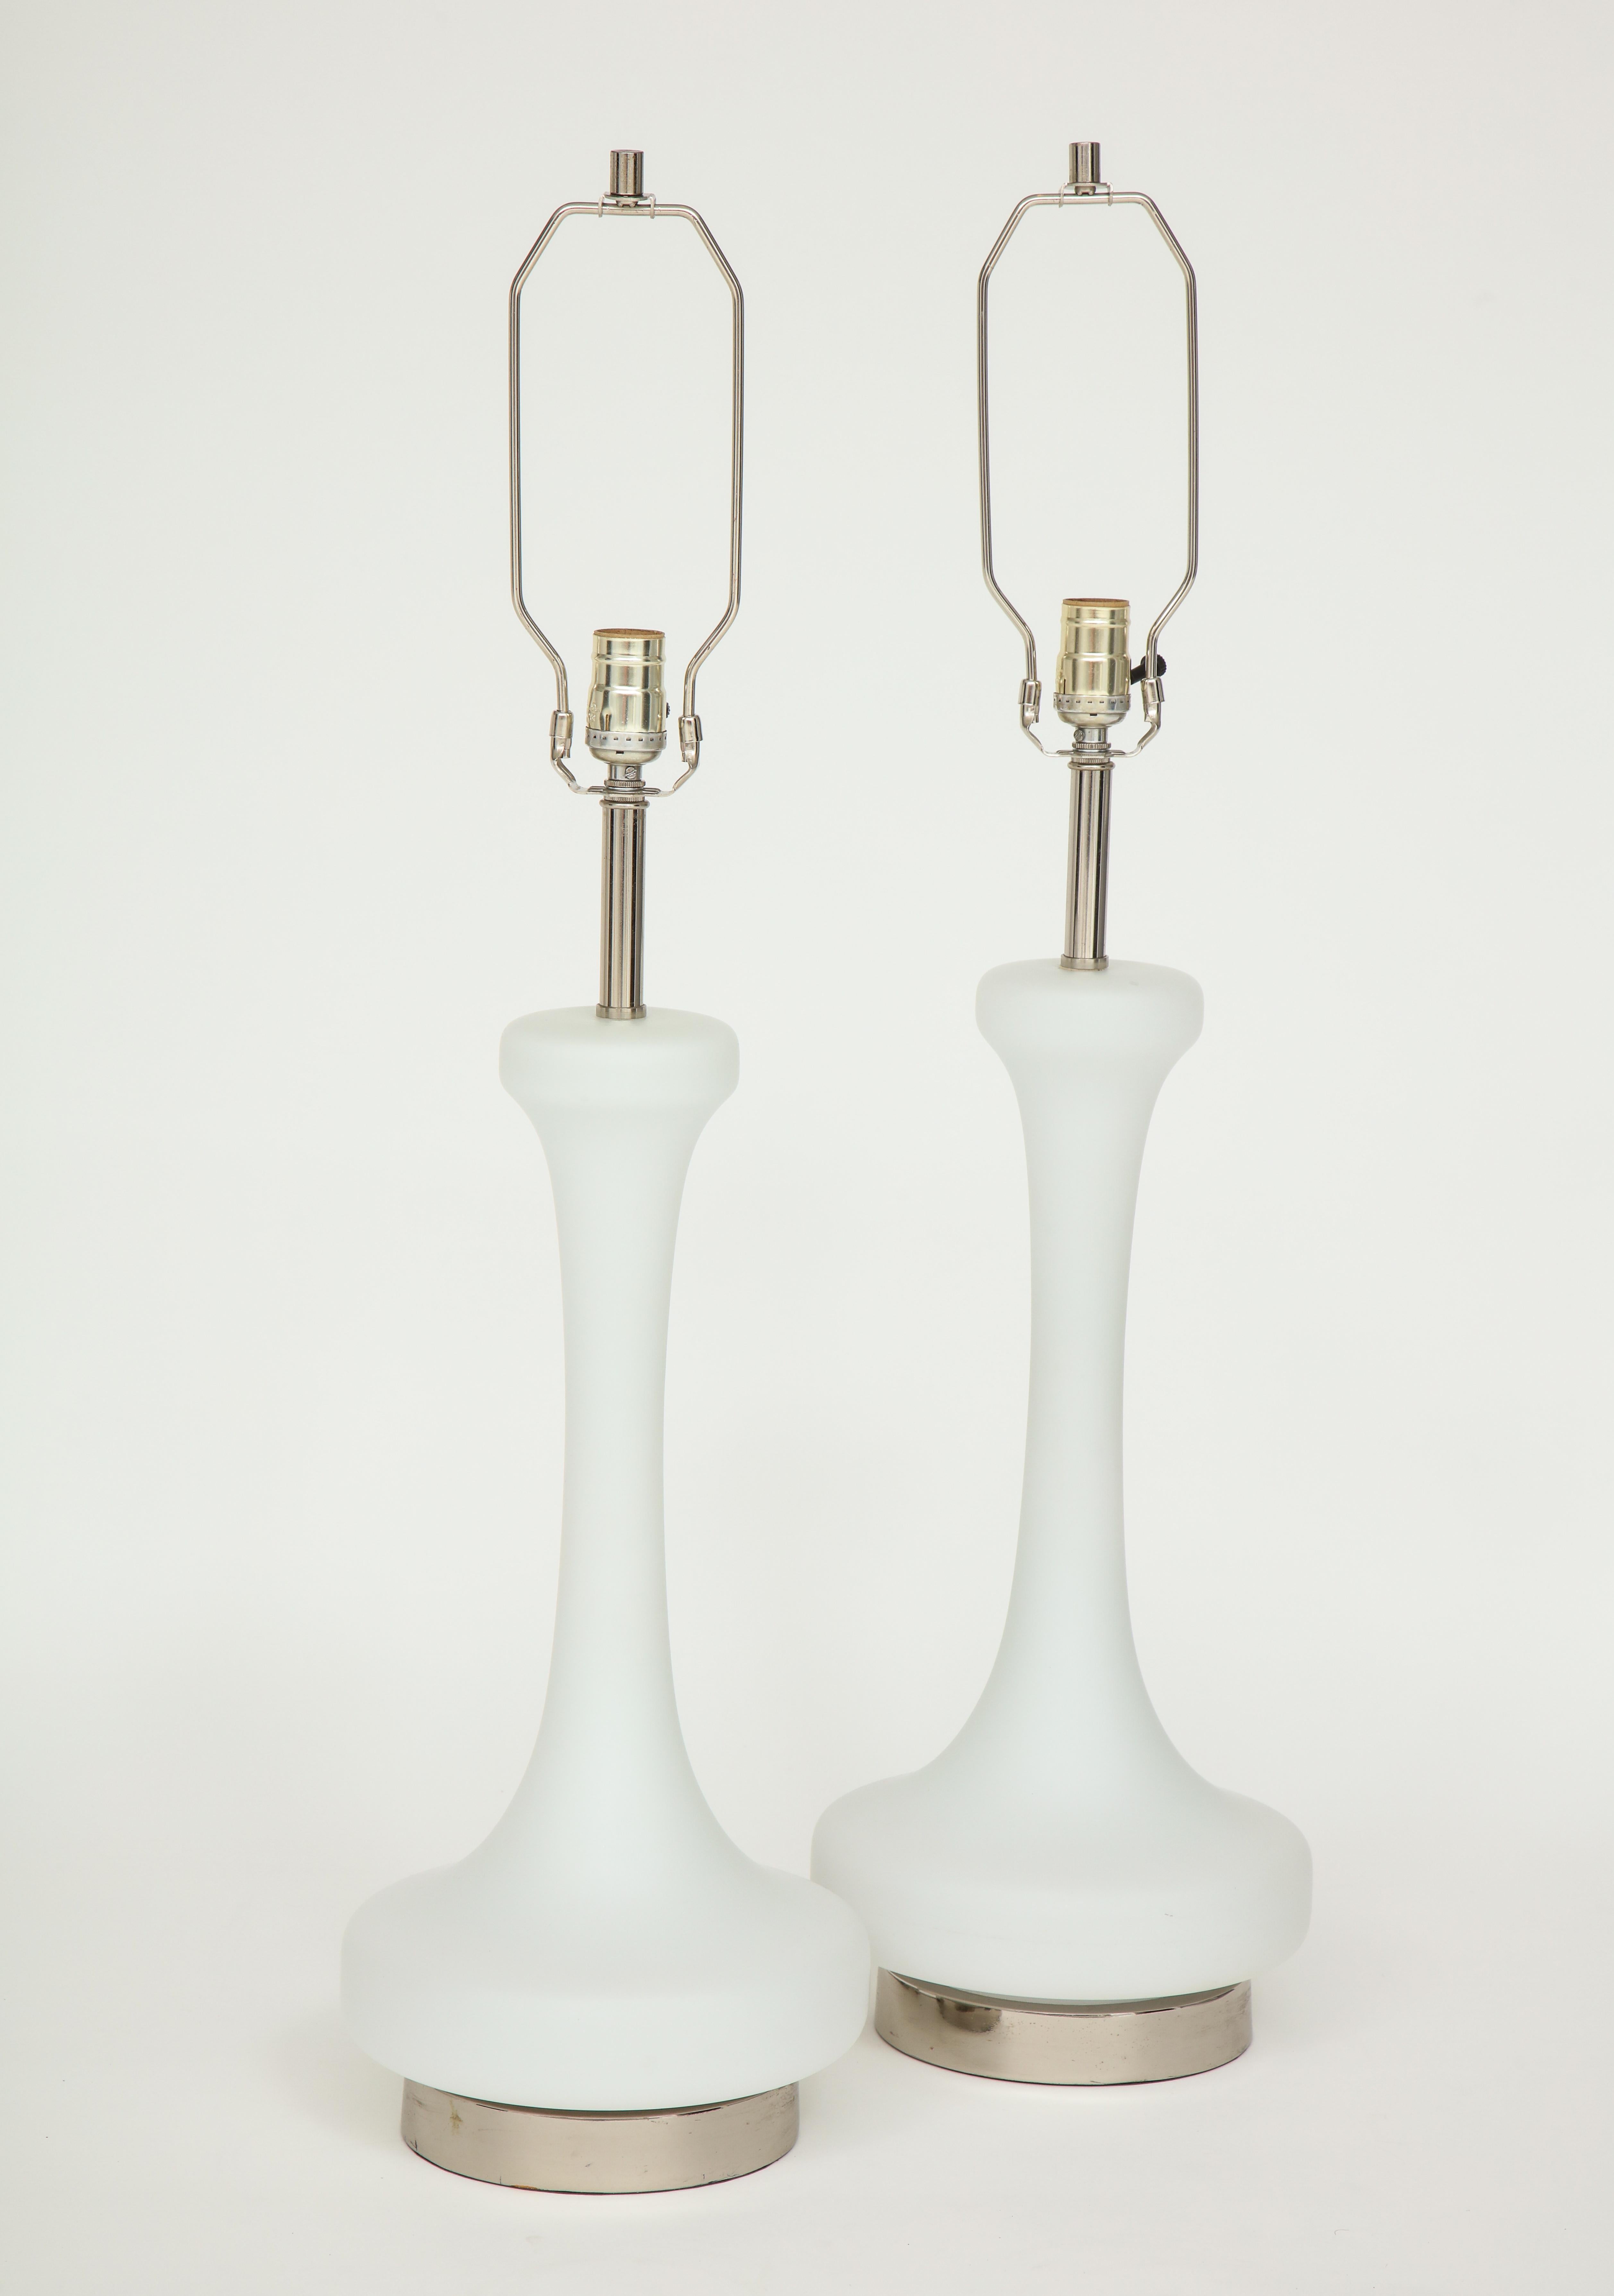 Pair of 1970s midcentury lamps by Laurel Lighting company.
The white frosted lamp bodies are mounted on polished chrome bases which can be illuminated by a 3- way switch. They have been newly rewired for the US and take standard light bulbs.
The